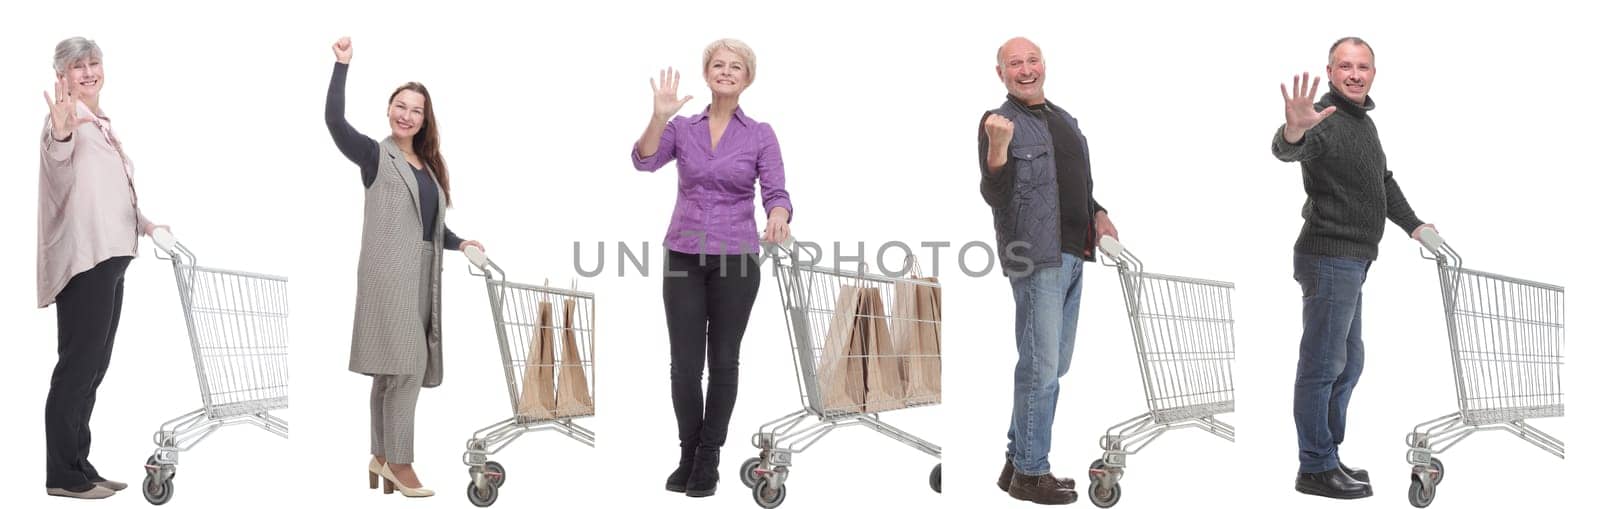 group of people with cart isolated on white background